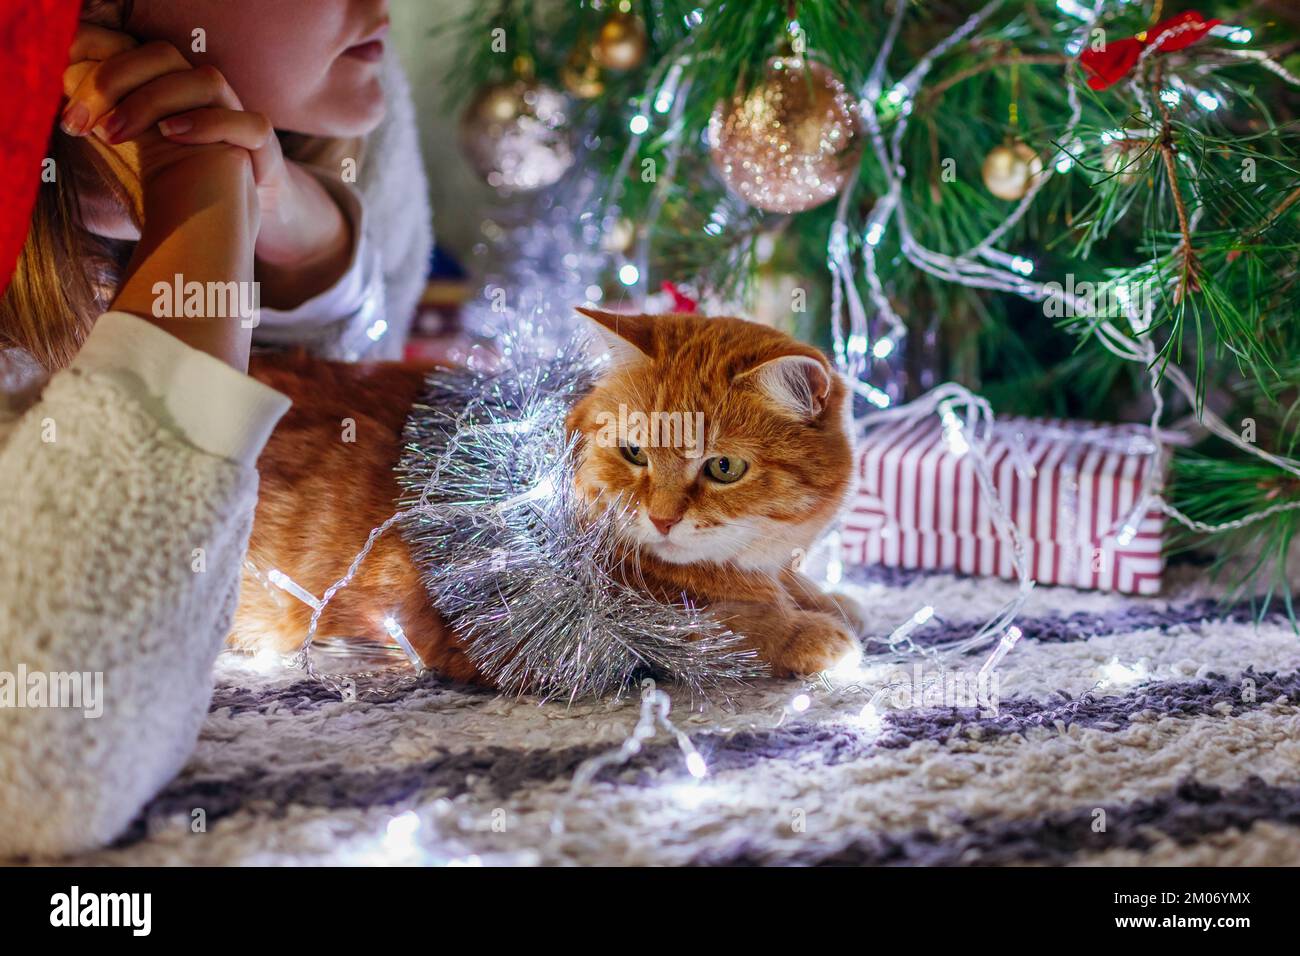 Christmas celebration with cat. Woman admiring decor by New year tree at home covered with tinsel and lights. Celebrating holidays alone Stock Photo